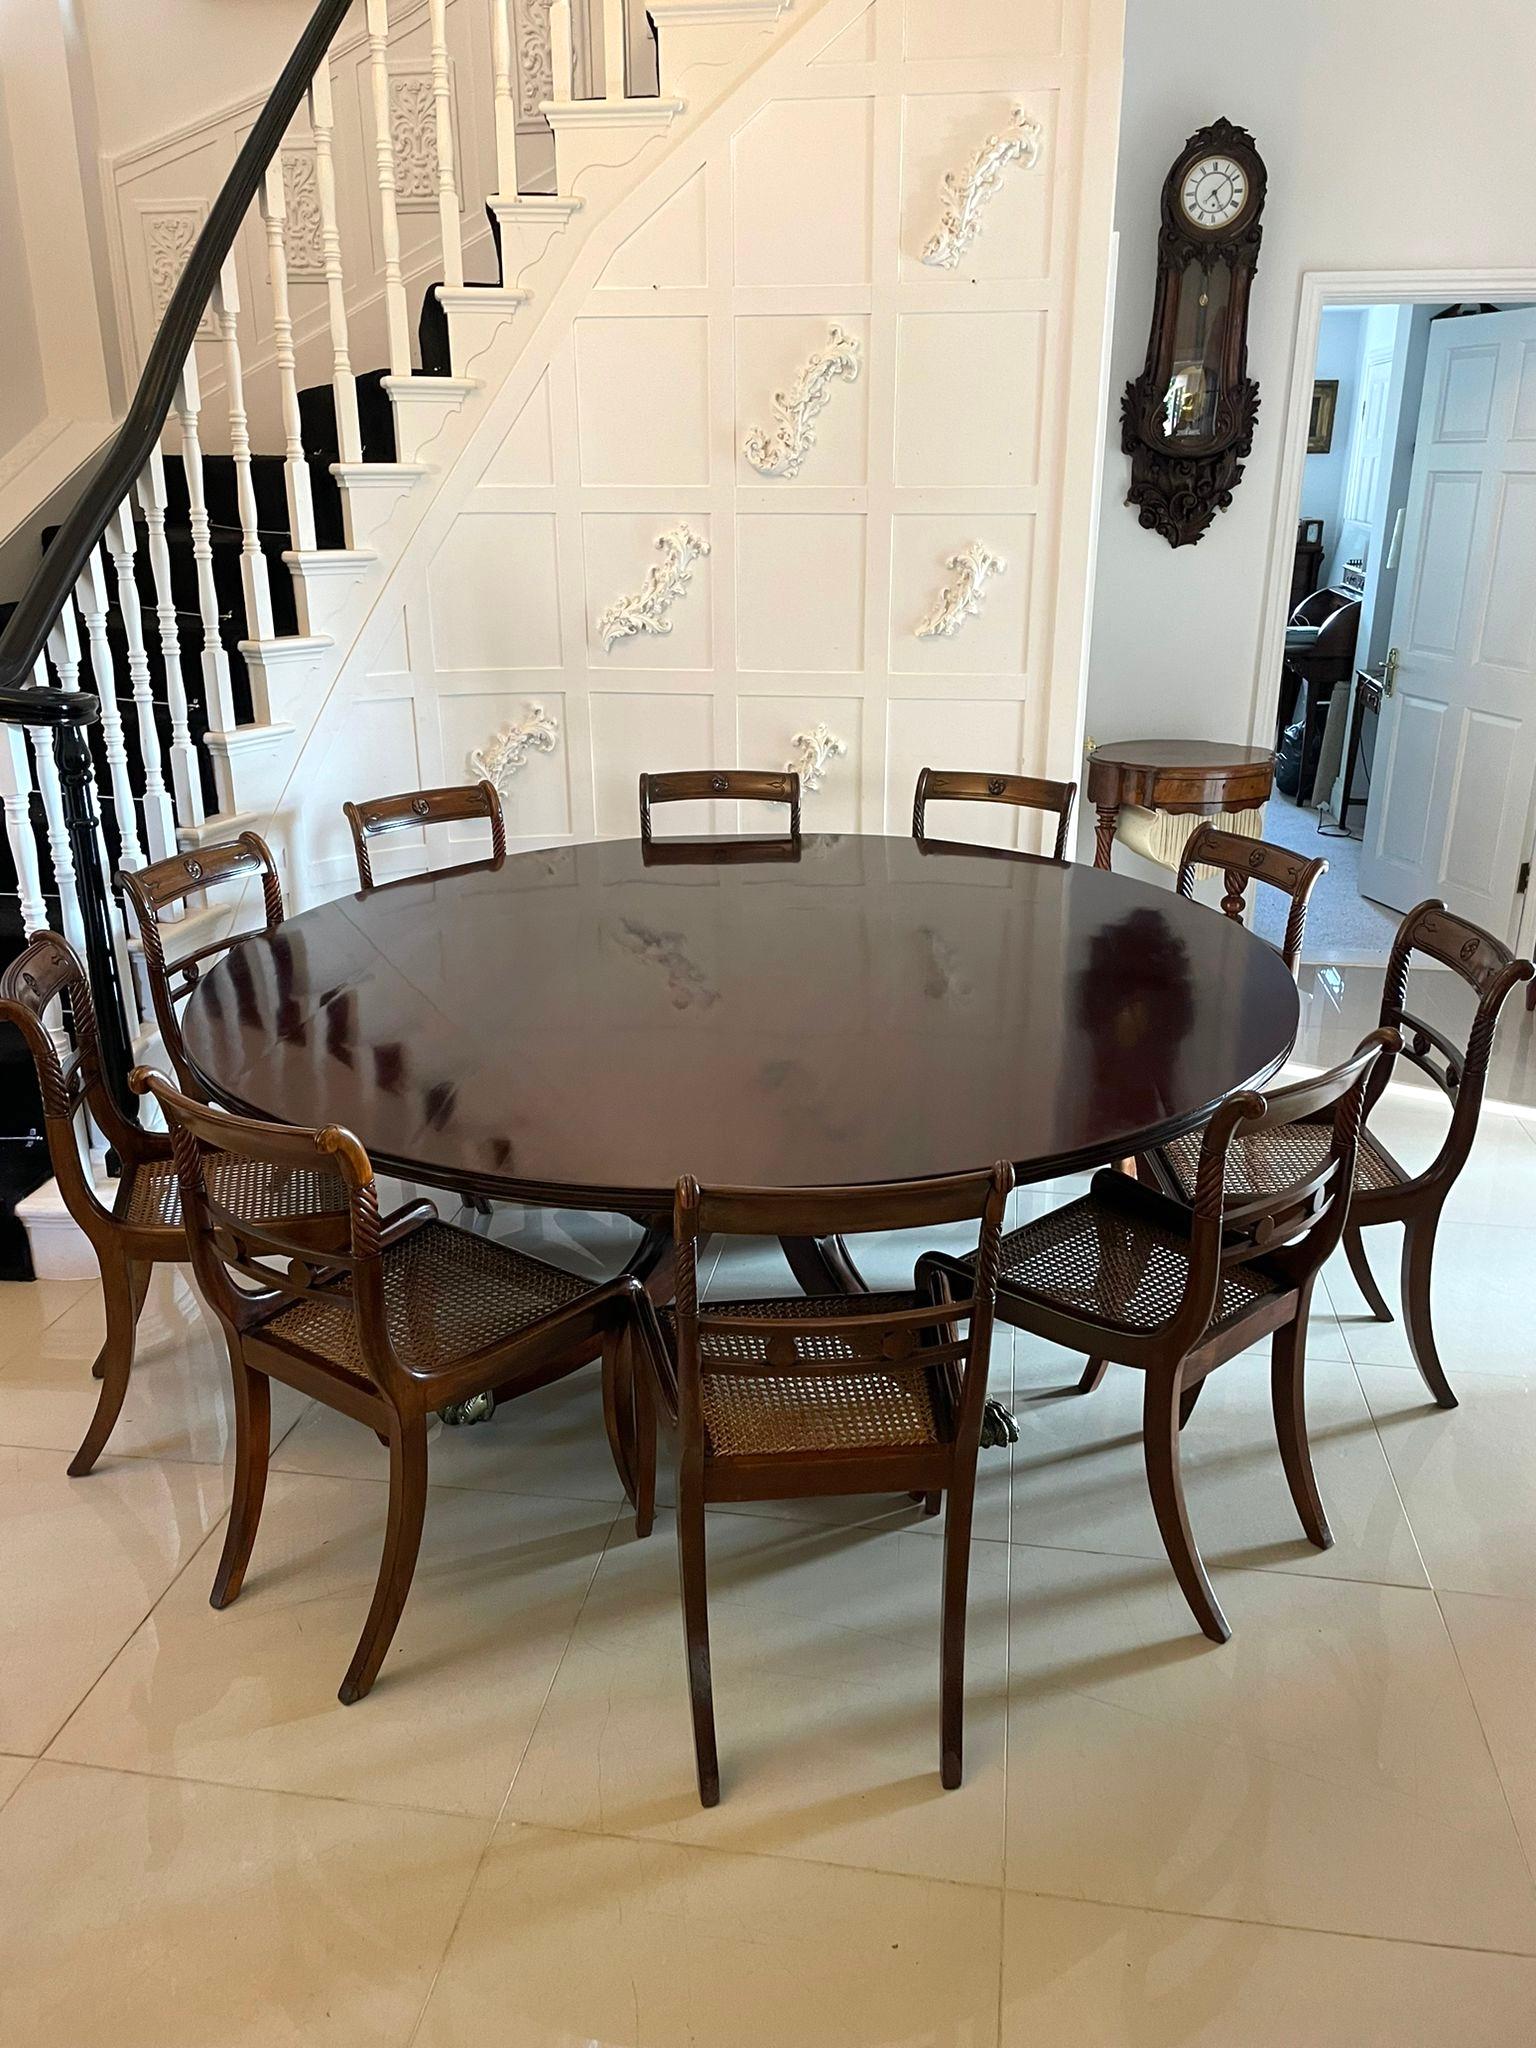 Outstanding quality large 10 seater antique regency quality mahogany round dining table having a large quality figured mahogany round tilt top with a moulded edge supported by a very grand turned pedestal column standing on 4 four shaped reeded